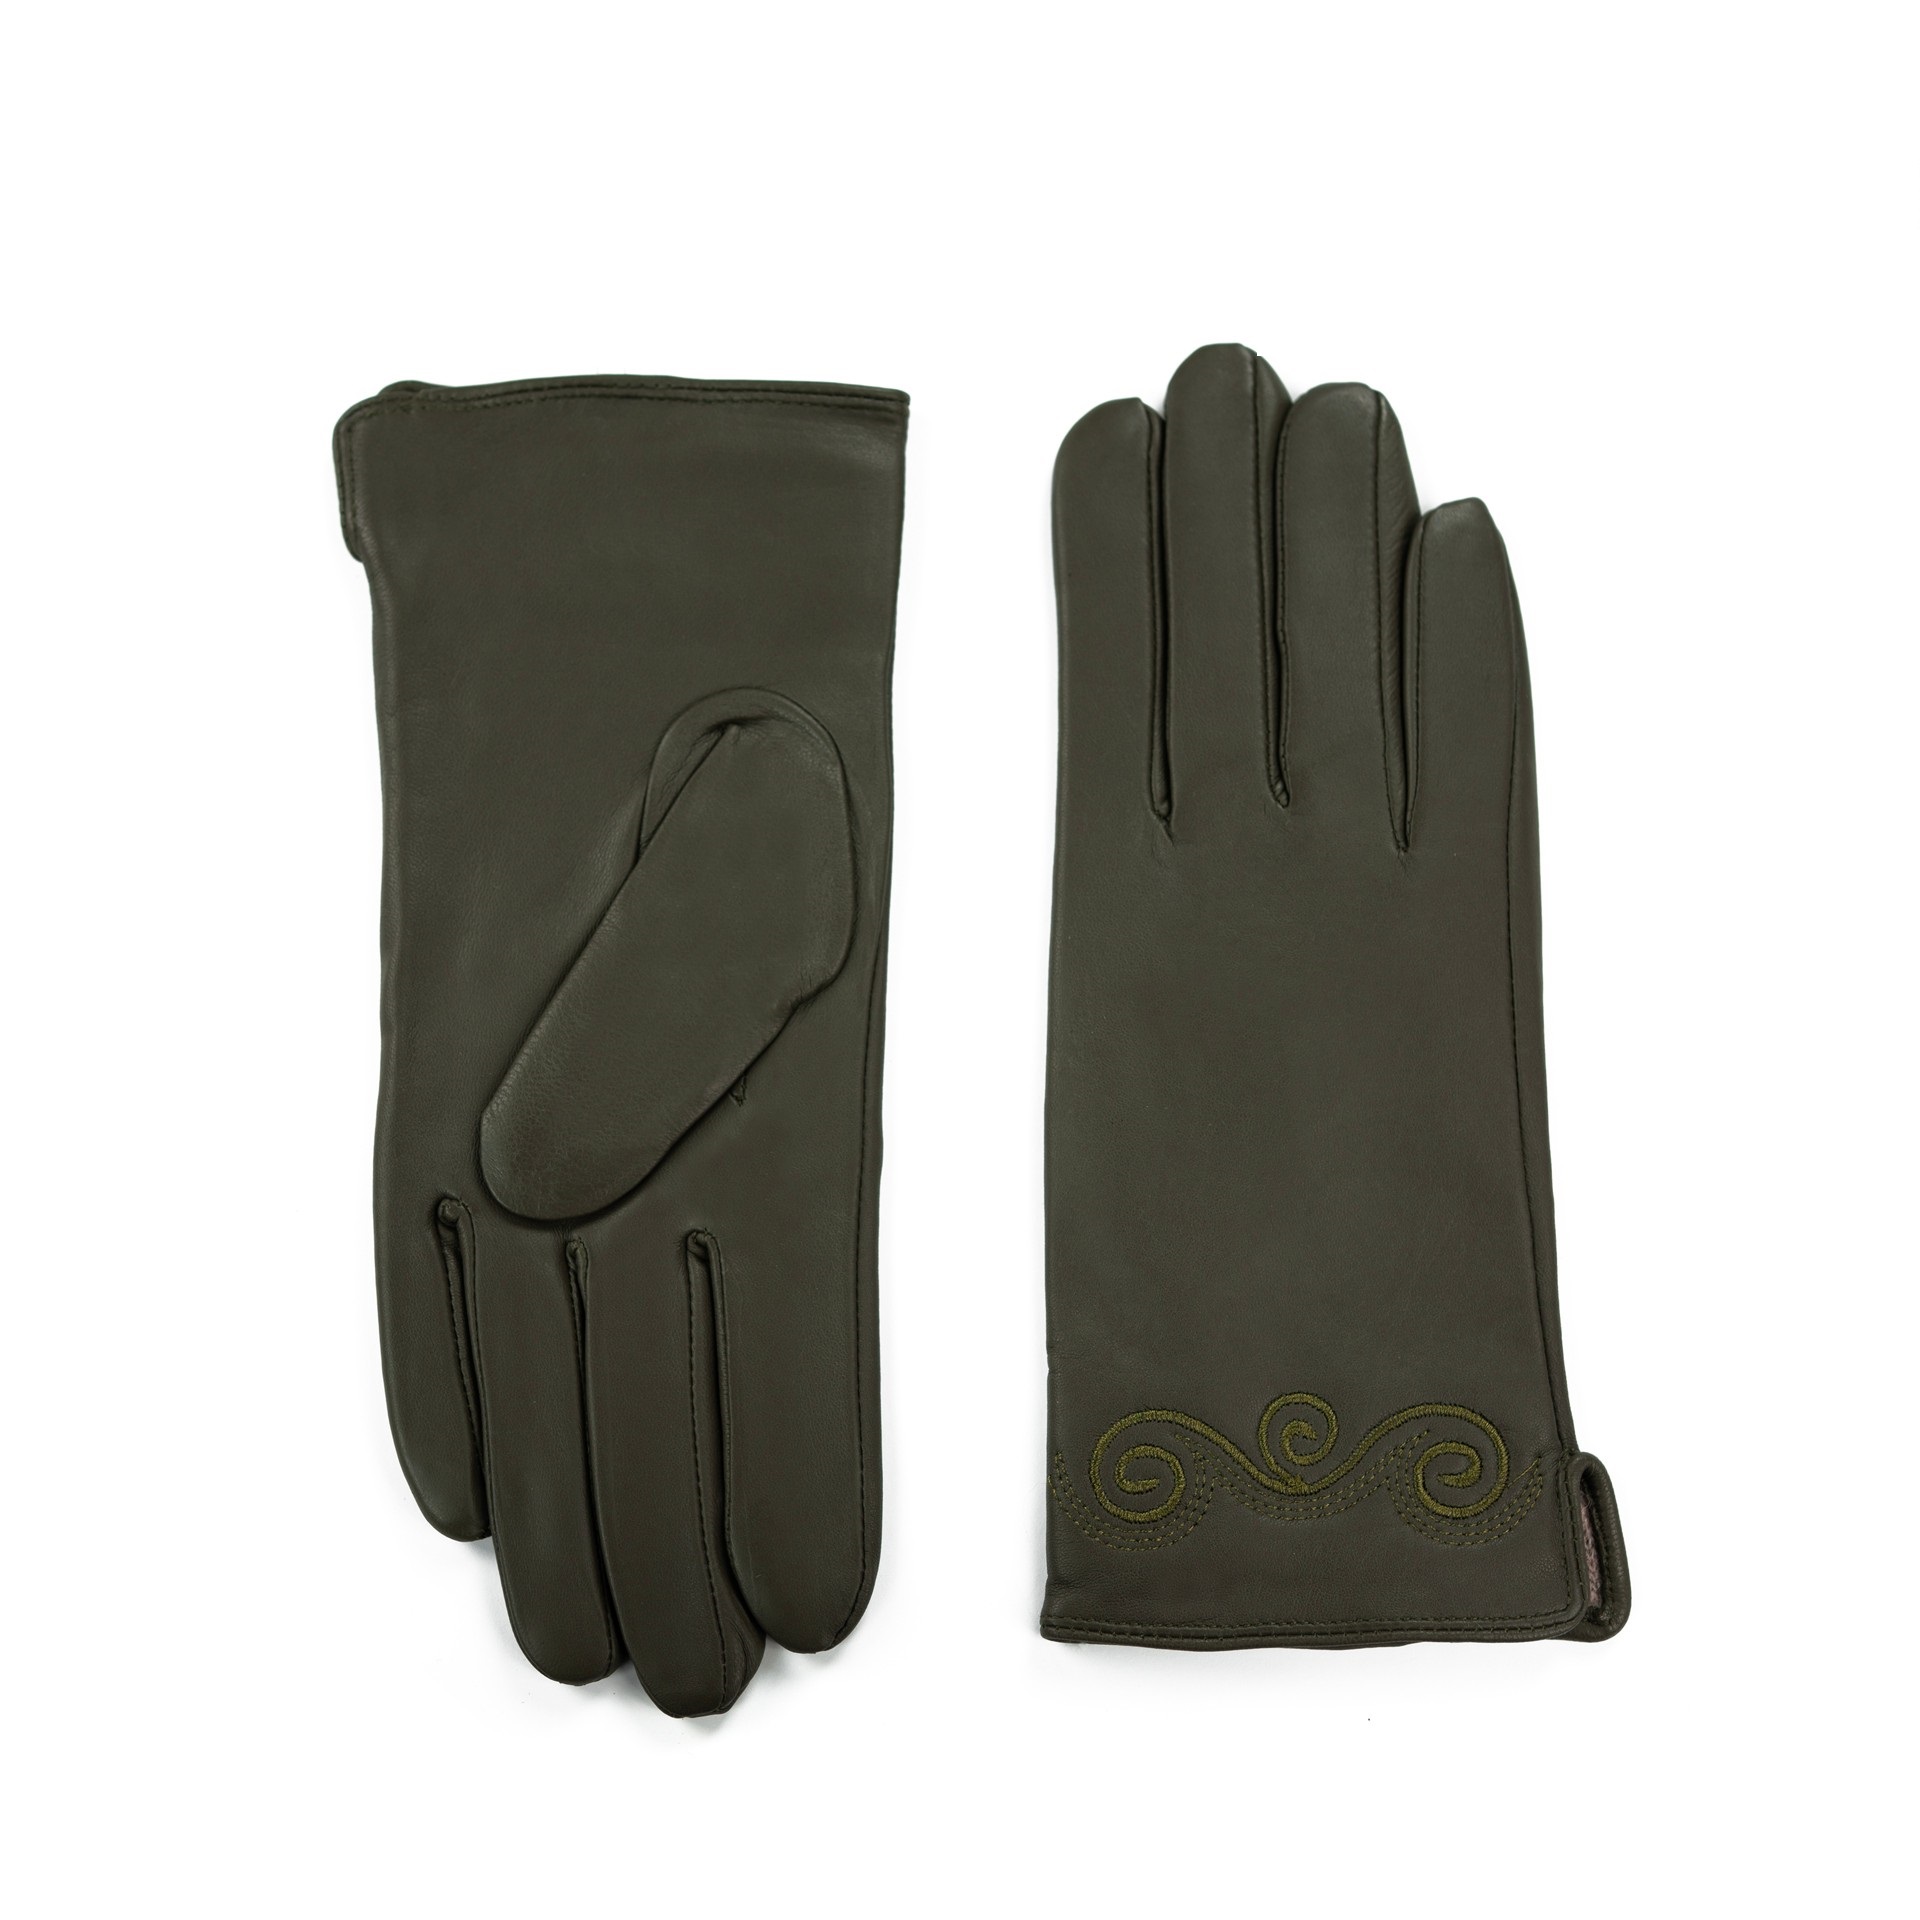 Art Of Polo Woman's Gloves rk23389-5